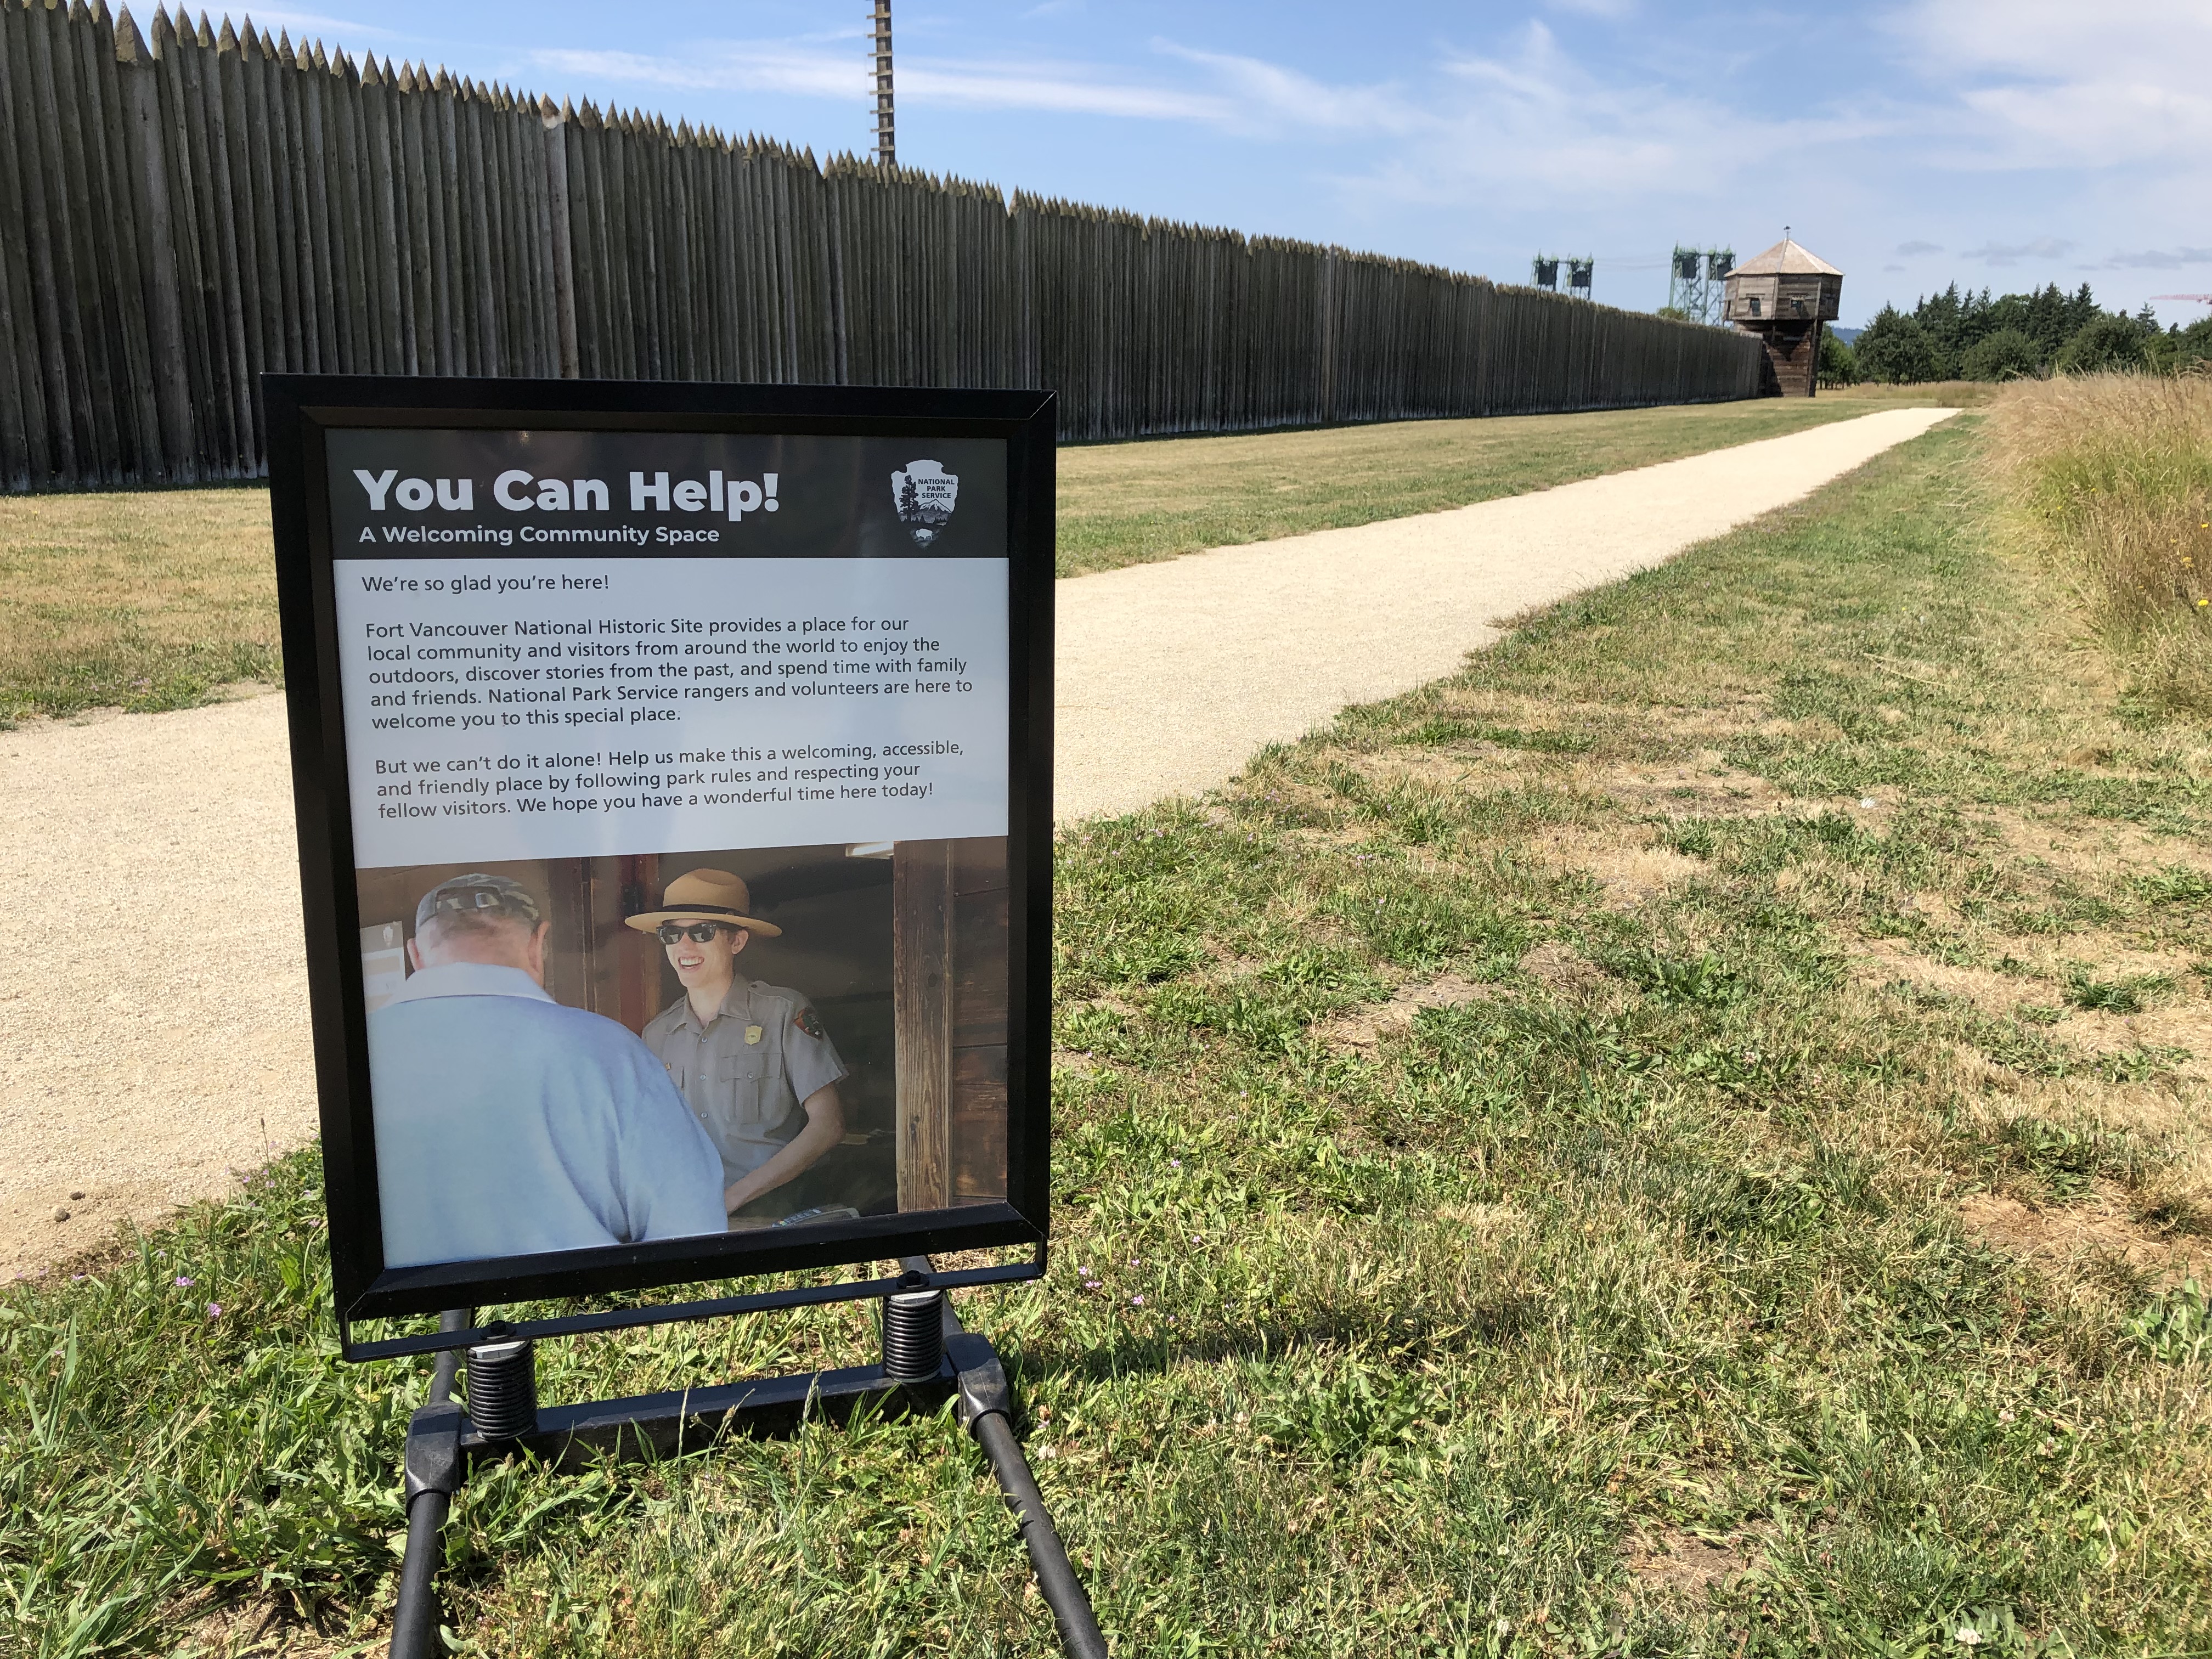 A panel with the headline text "You Can Help" sits in a grassy area outside Fort Vancouver.